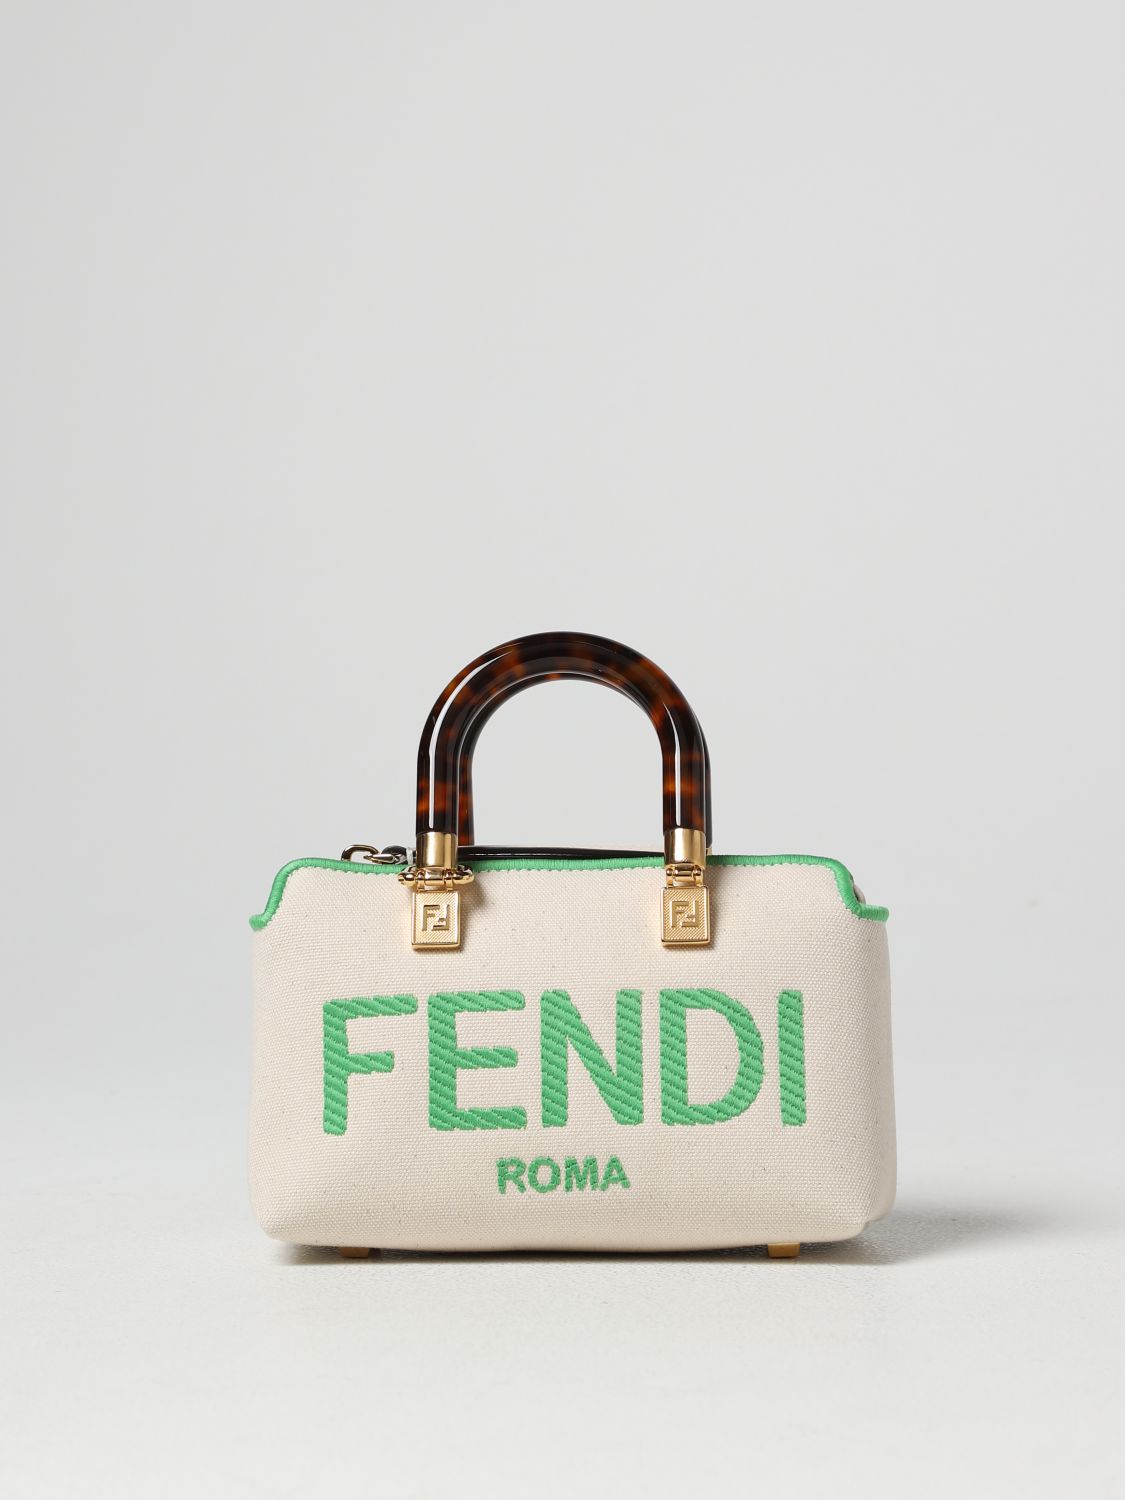 FENDI MINI BY THE WAY FENDI BAG IN CANVAS WITH EMBROIDERED LOGO,382193012